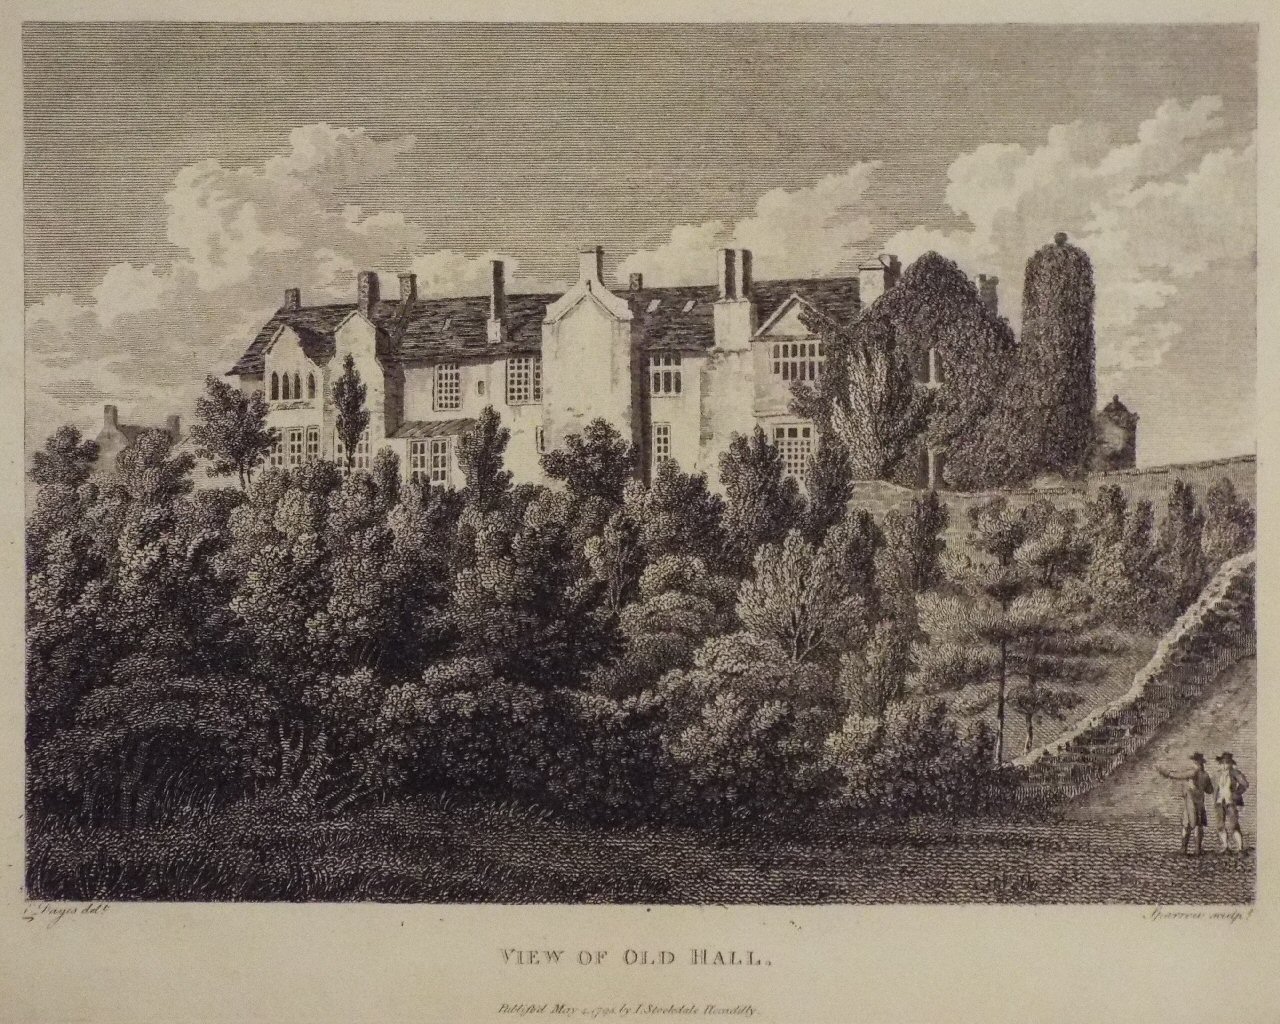 Print - View of Old Hall. - 